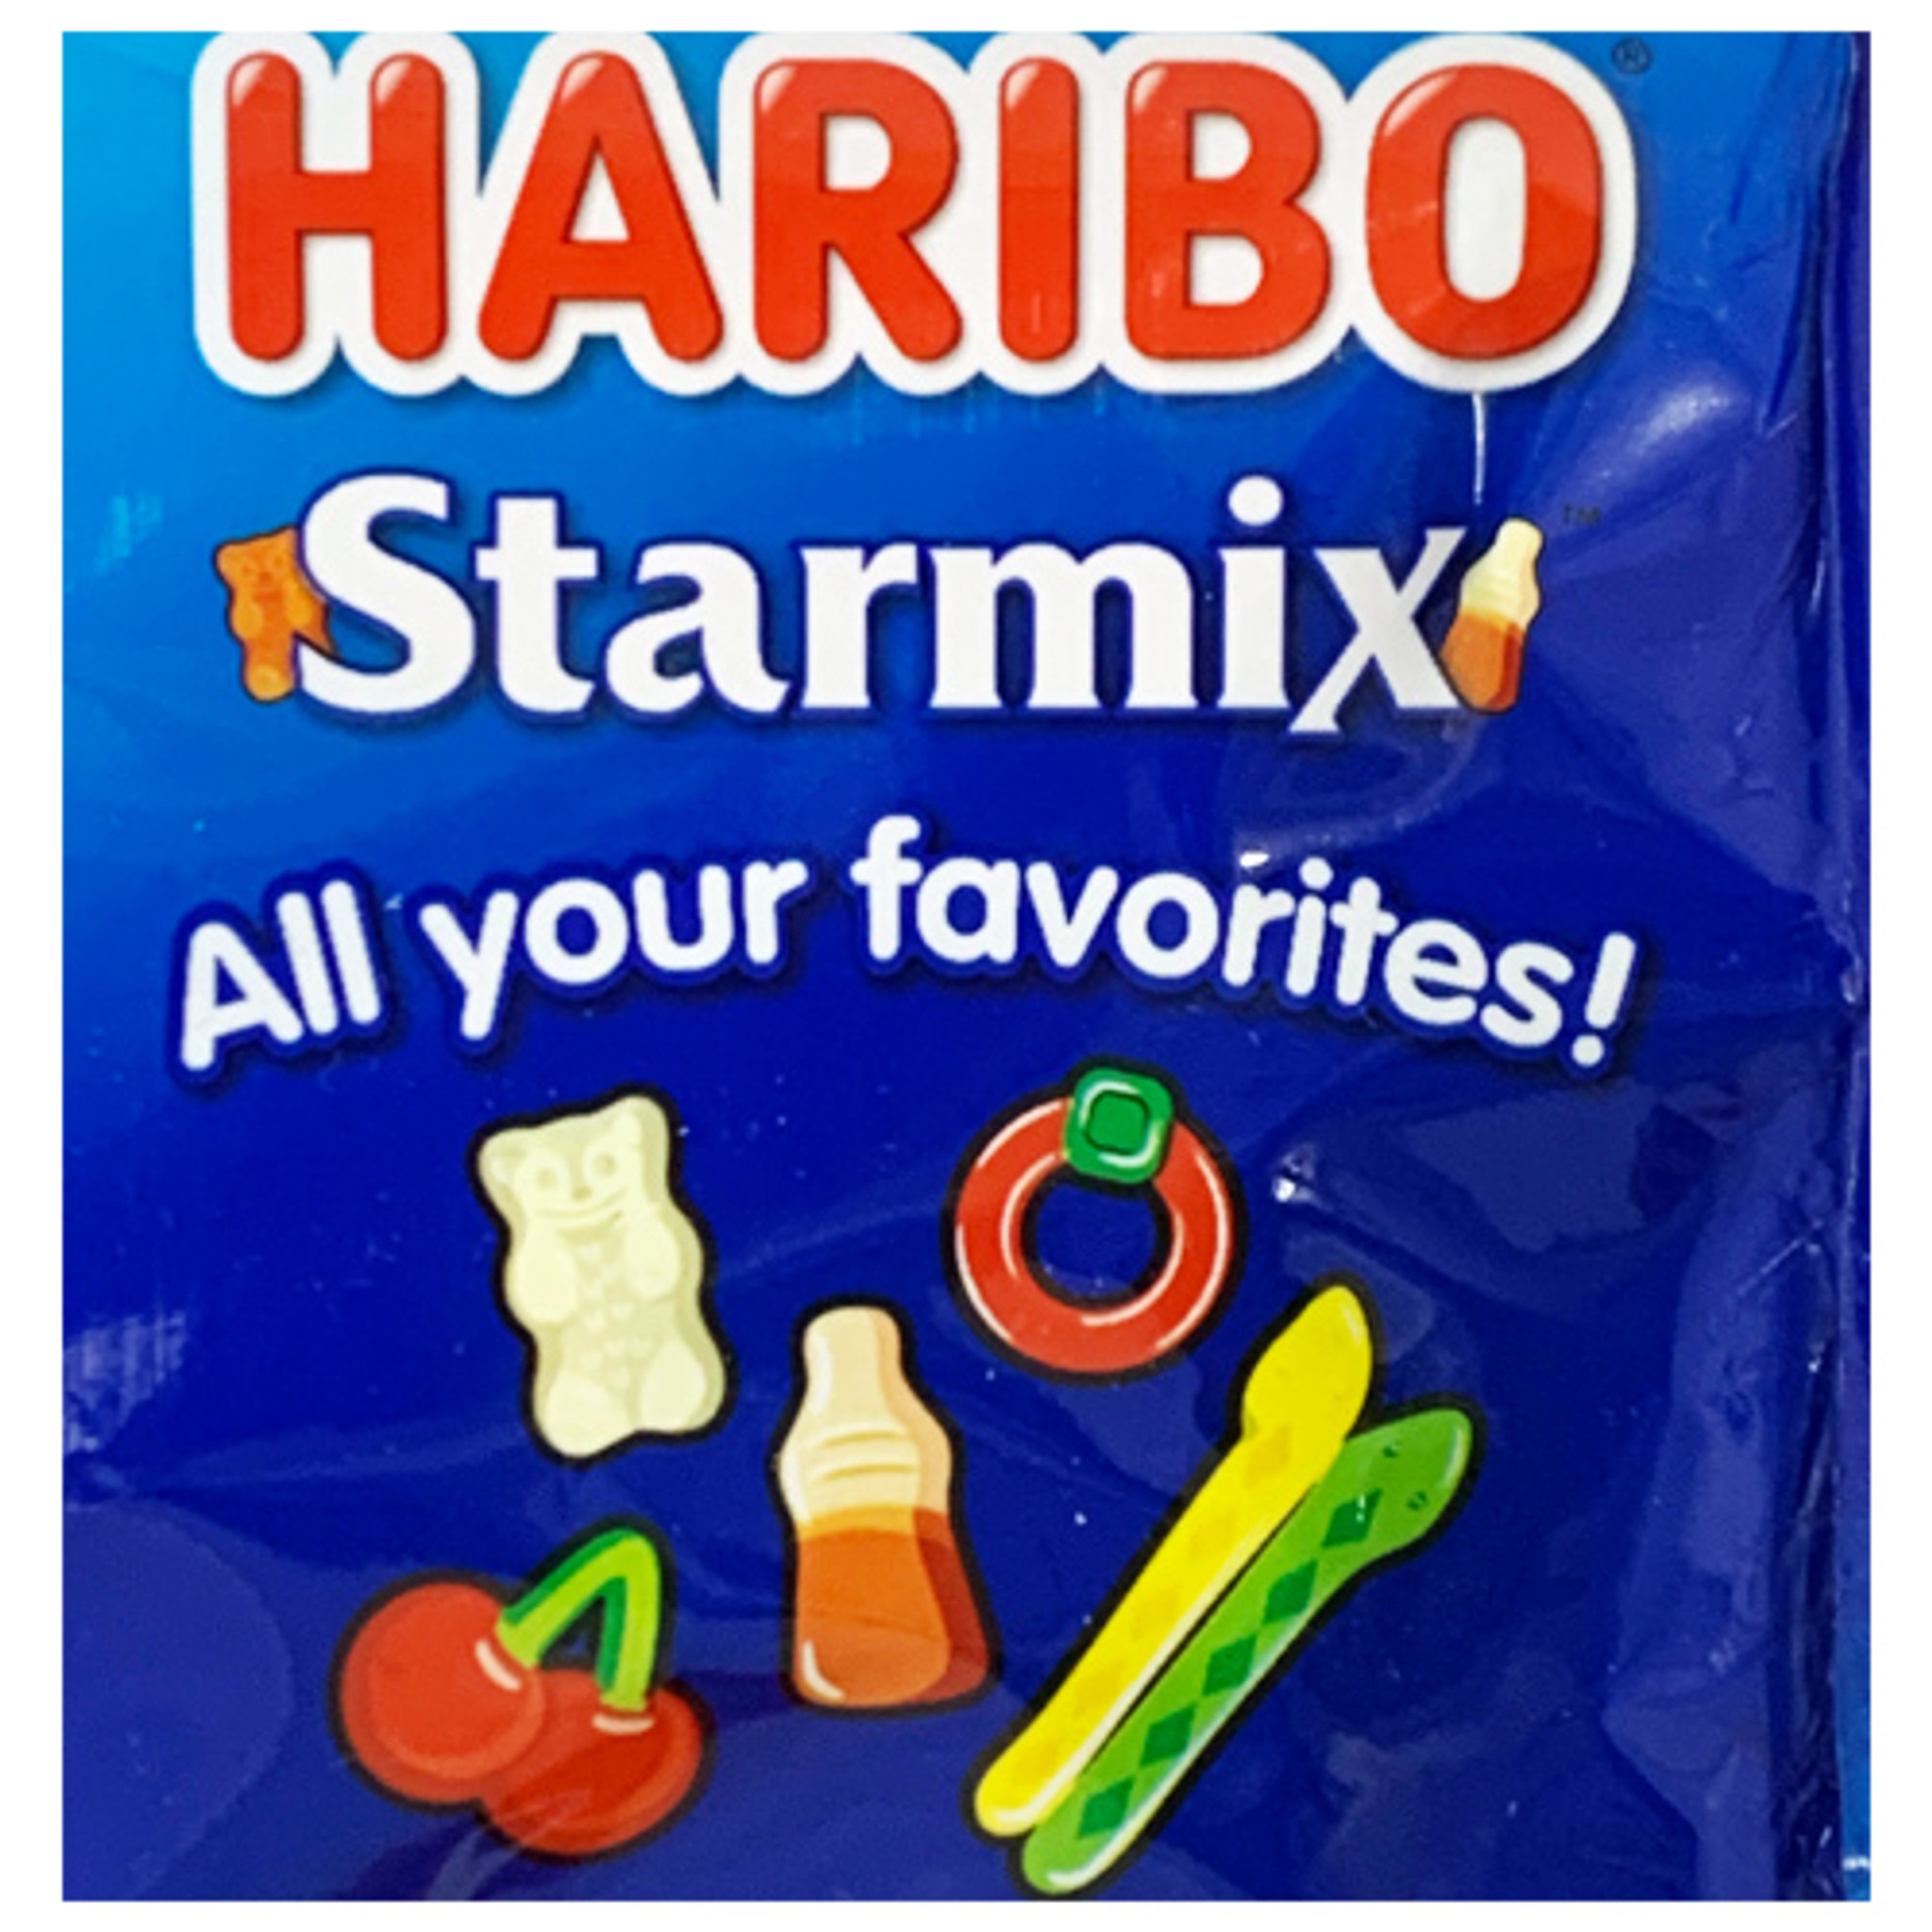 Haribo "Starmix" Seller Gummy Candy Selection - 5 oz. - The Taste of Germany